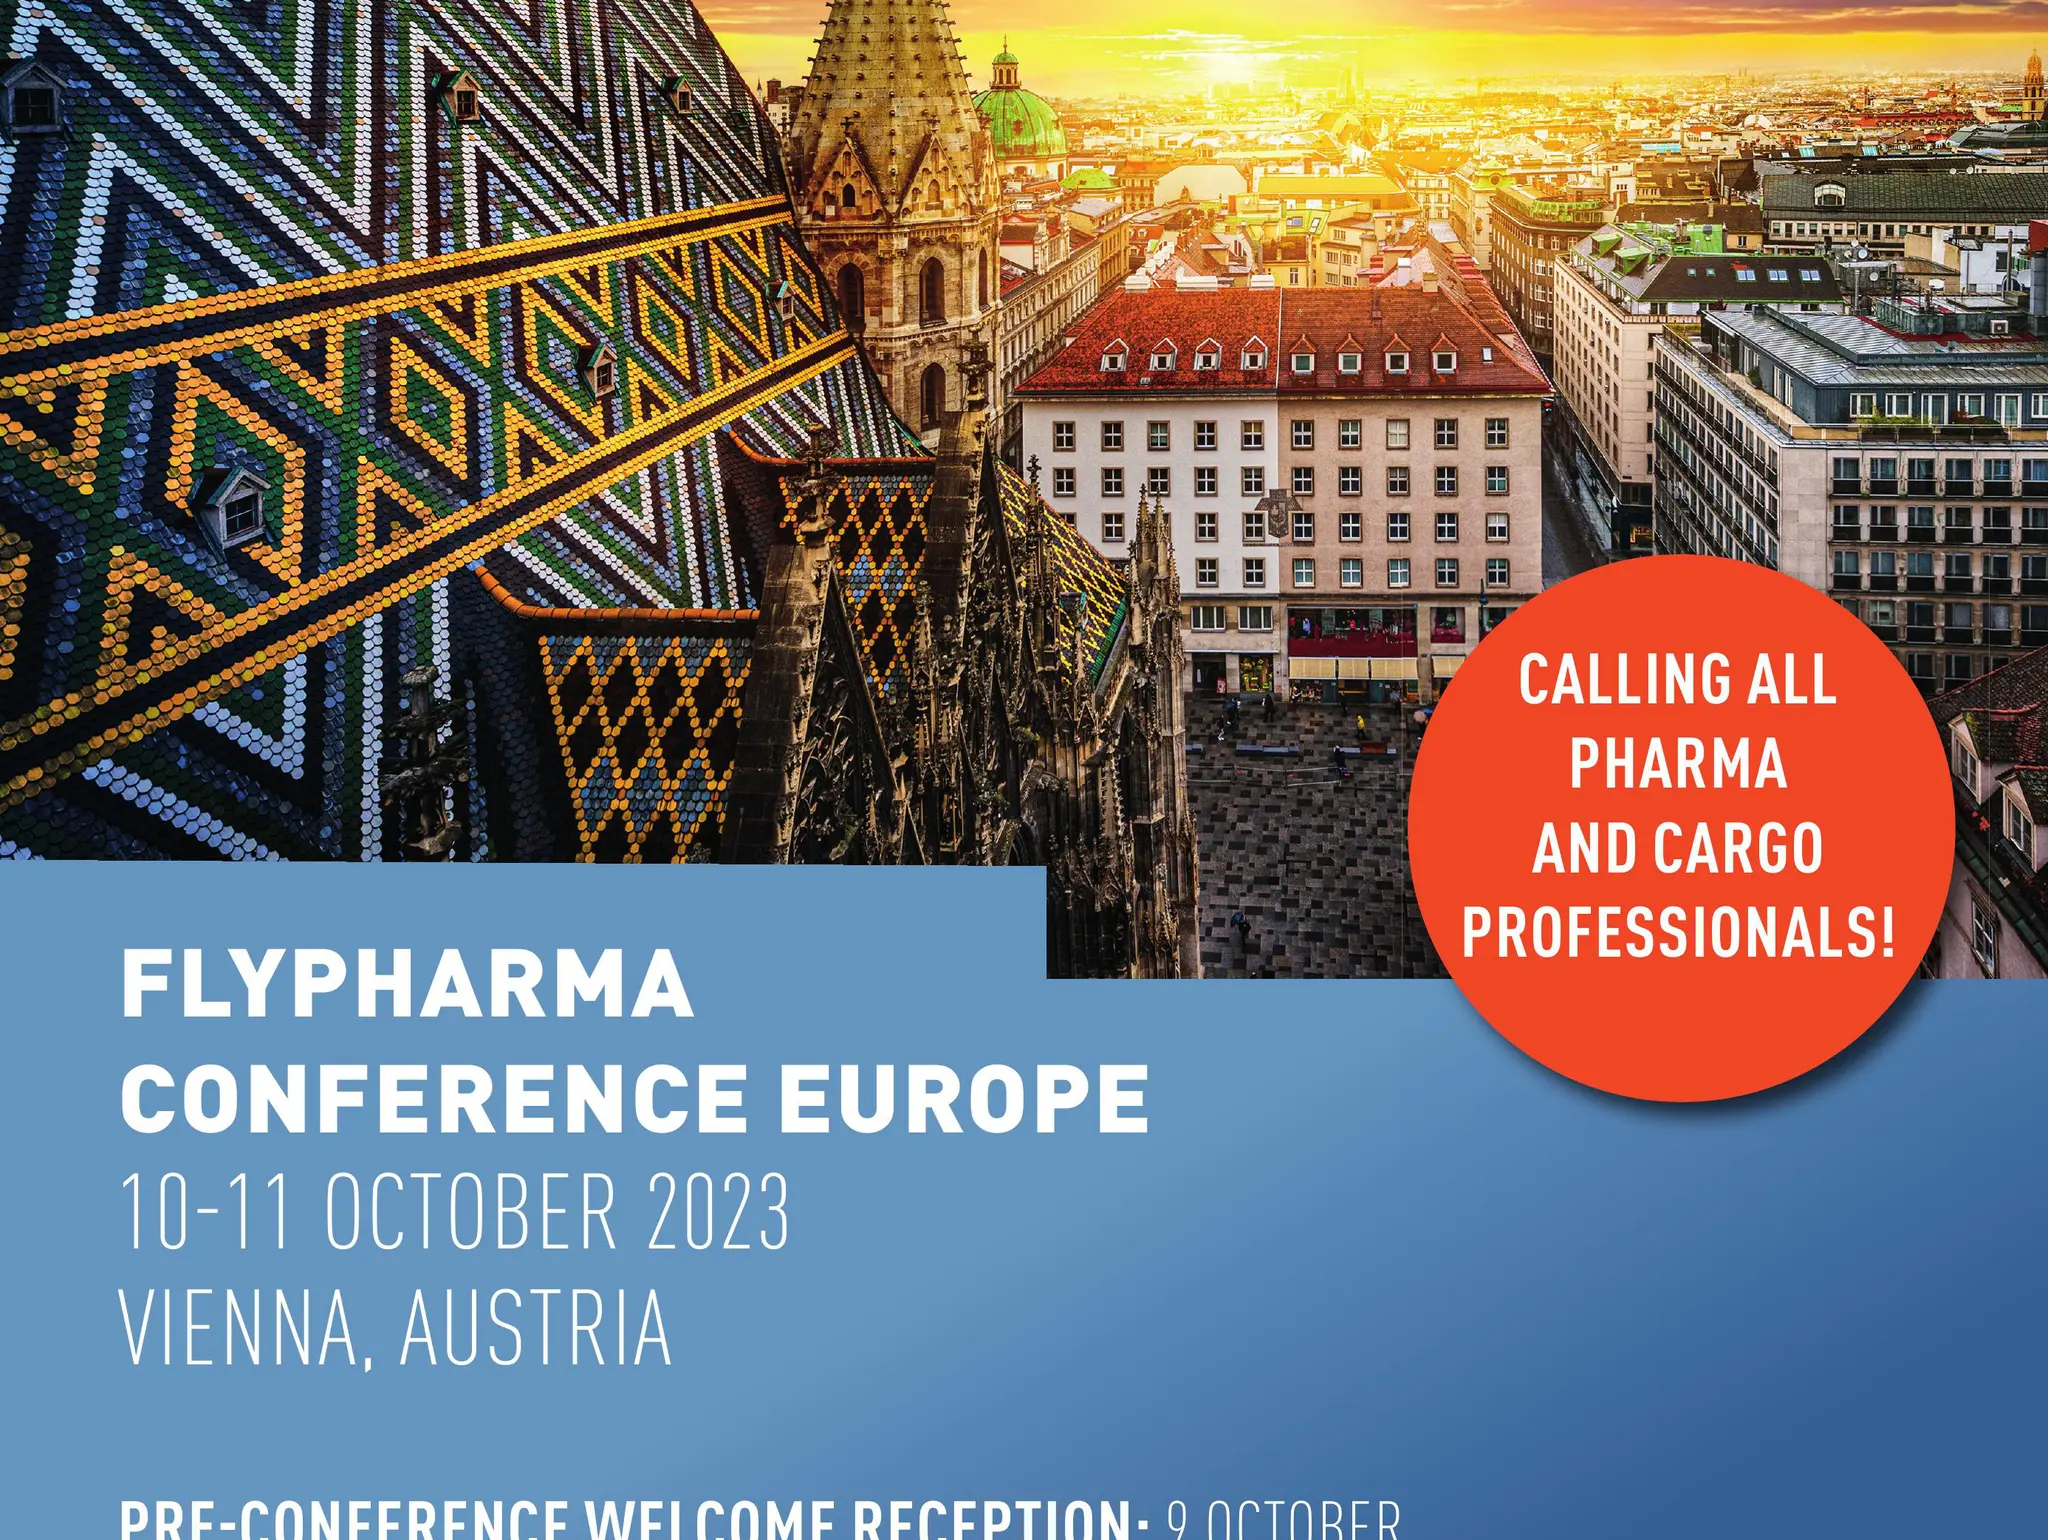 FLYPHARMA CONFERENCE EUROPE